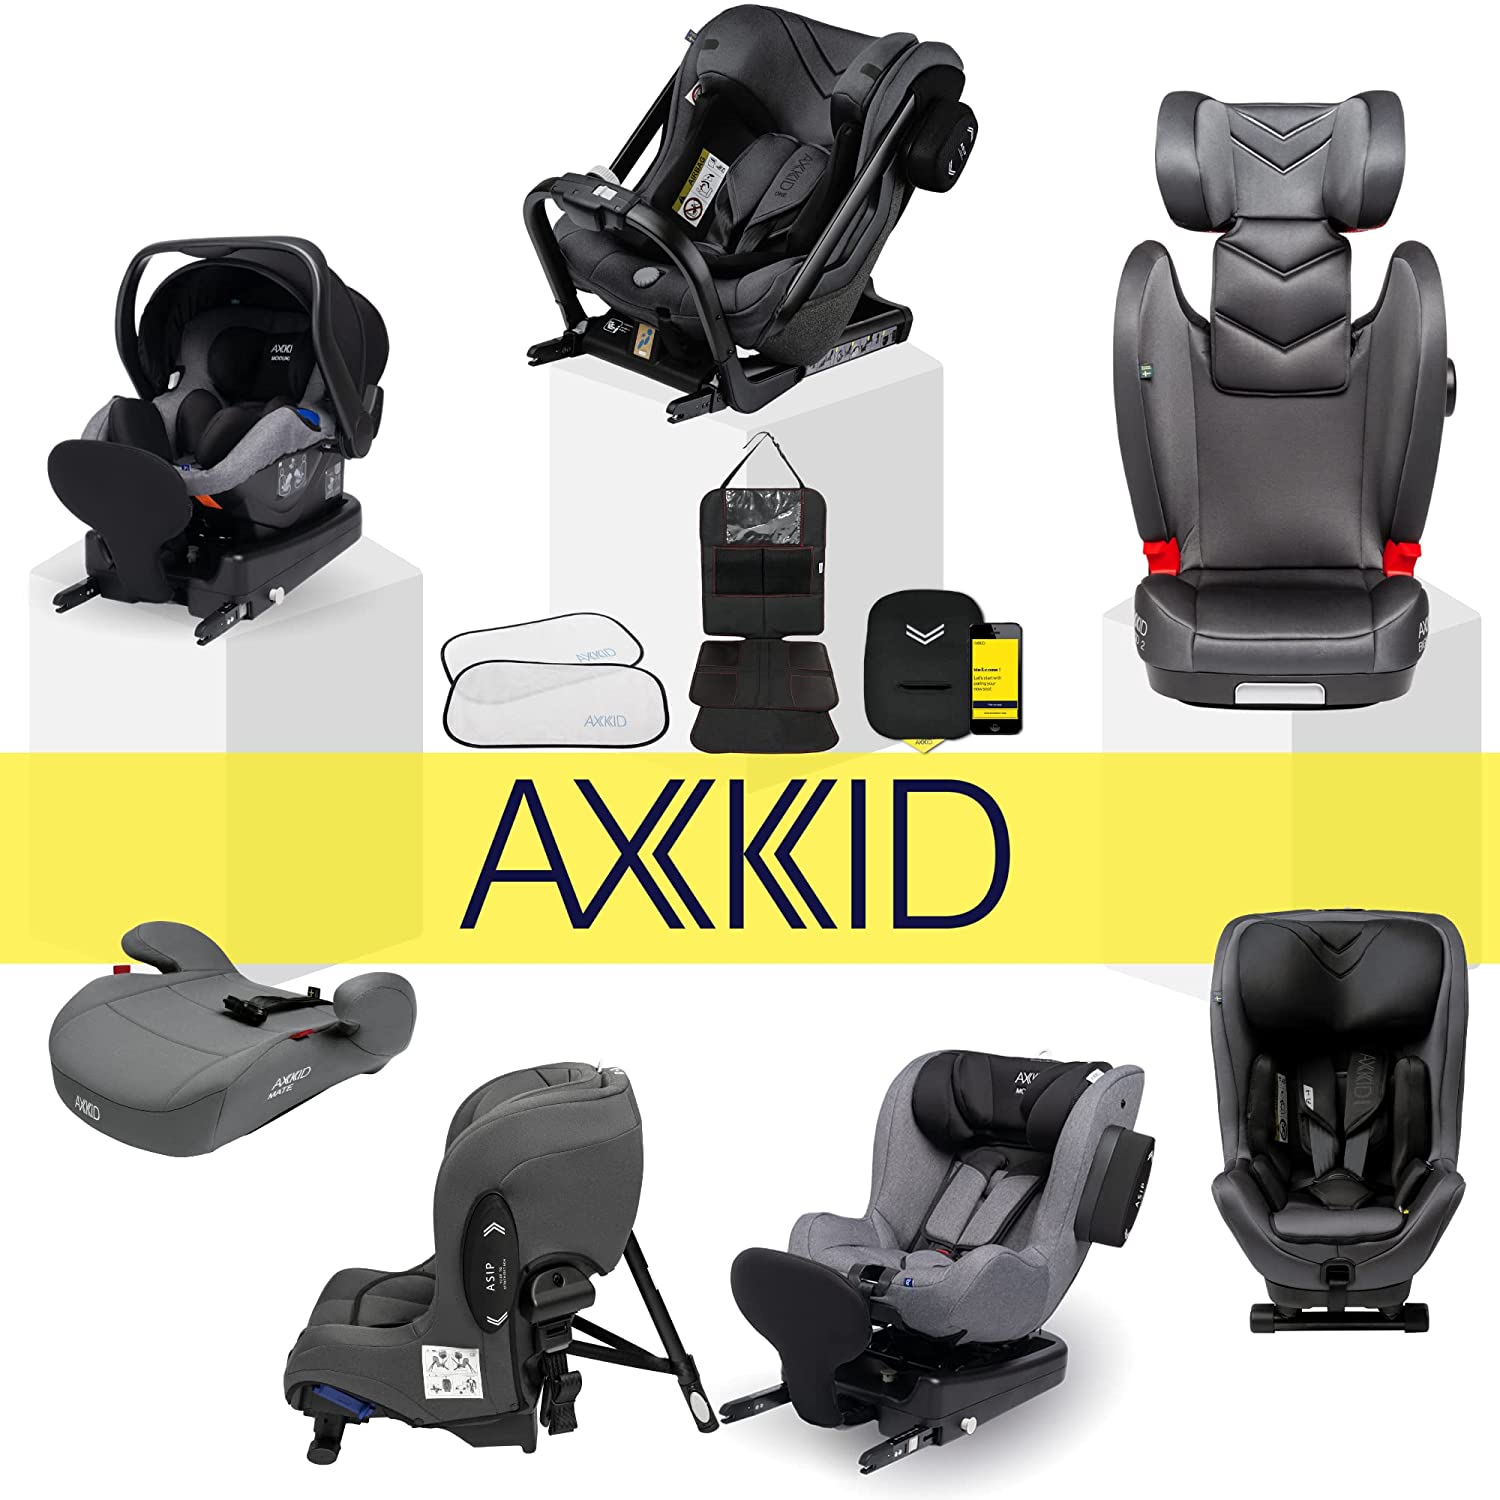 Axkid Mate Booster Seat Booster Seat for Children from 15 to 36 kg (Tar)